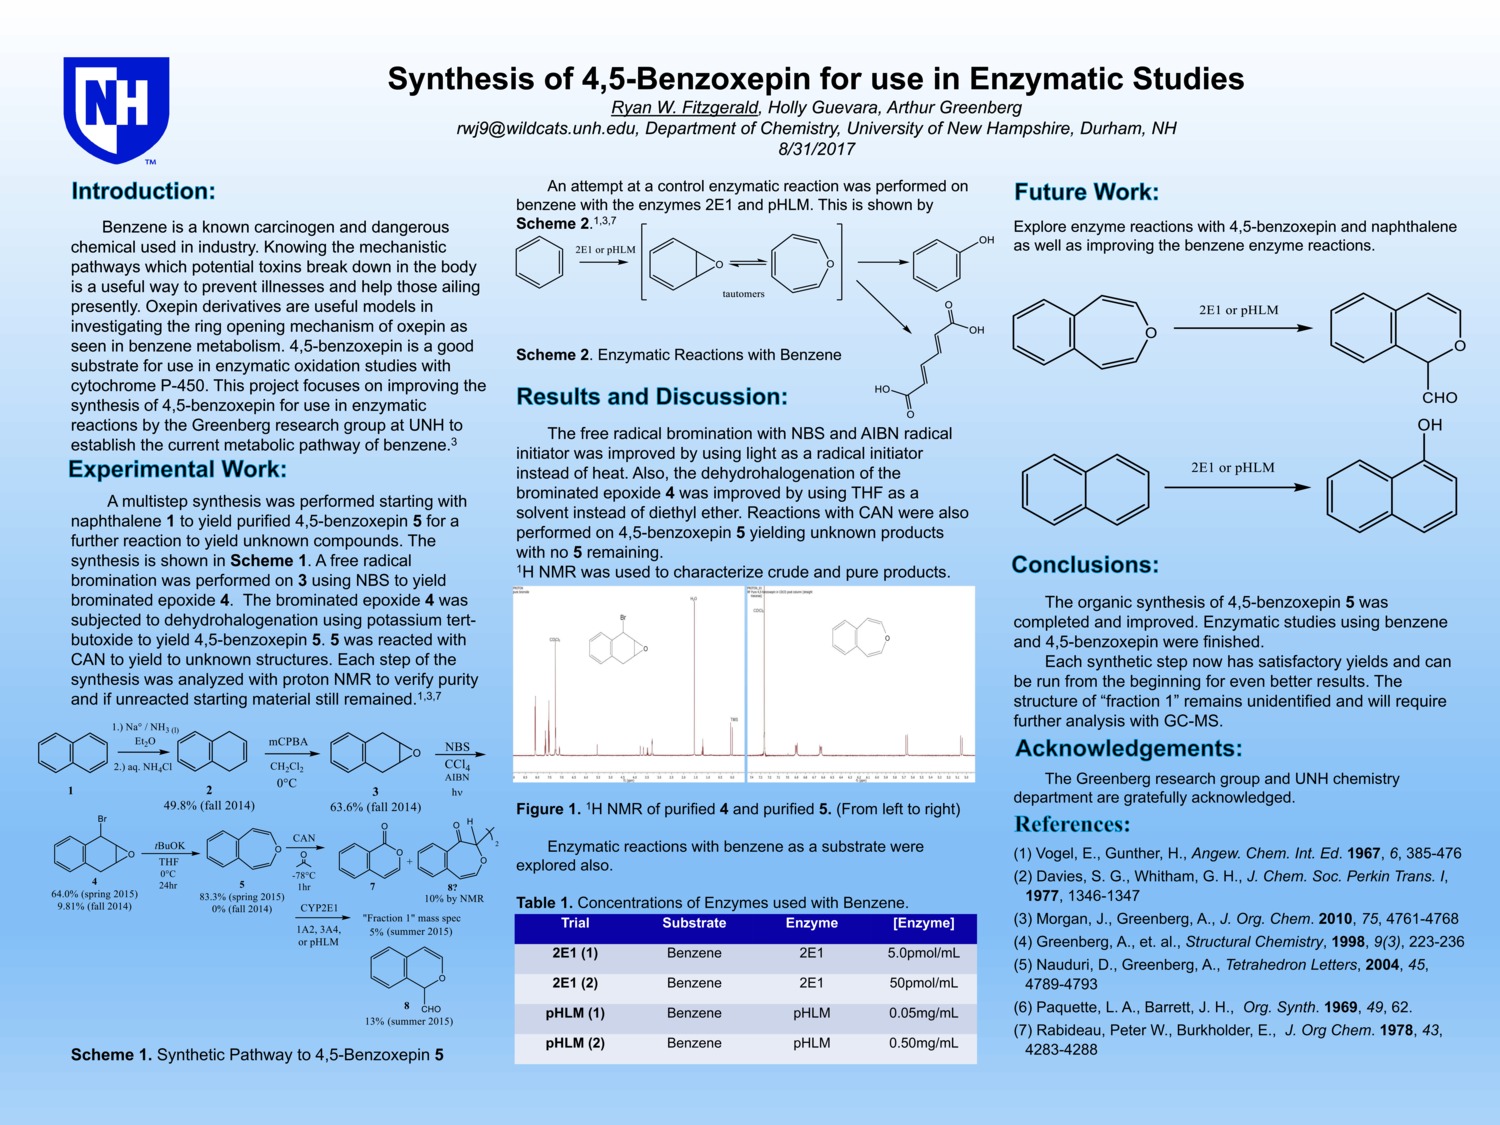 Synthesis Of 4,5-Benzoxepin For Use In Enzymatic Studies by rwj9